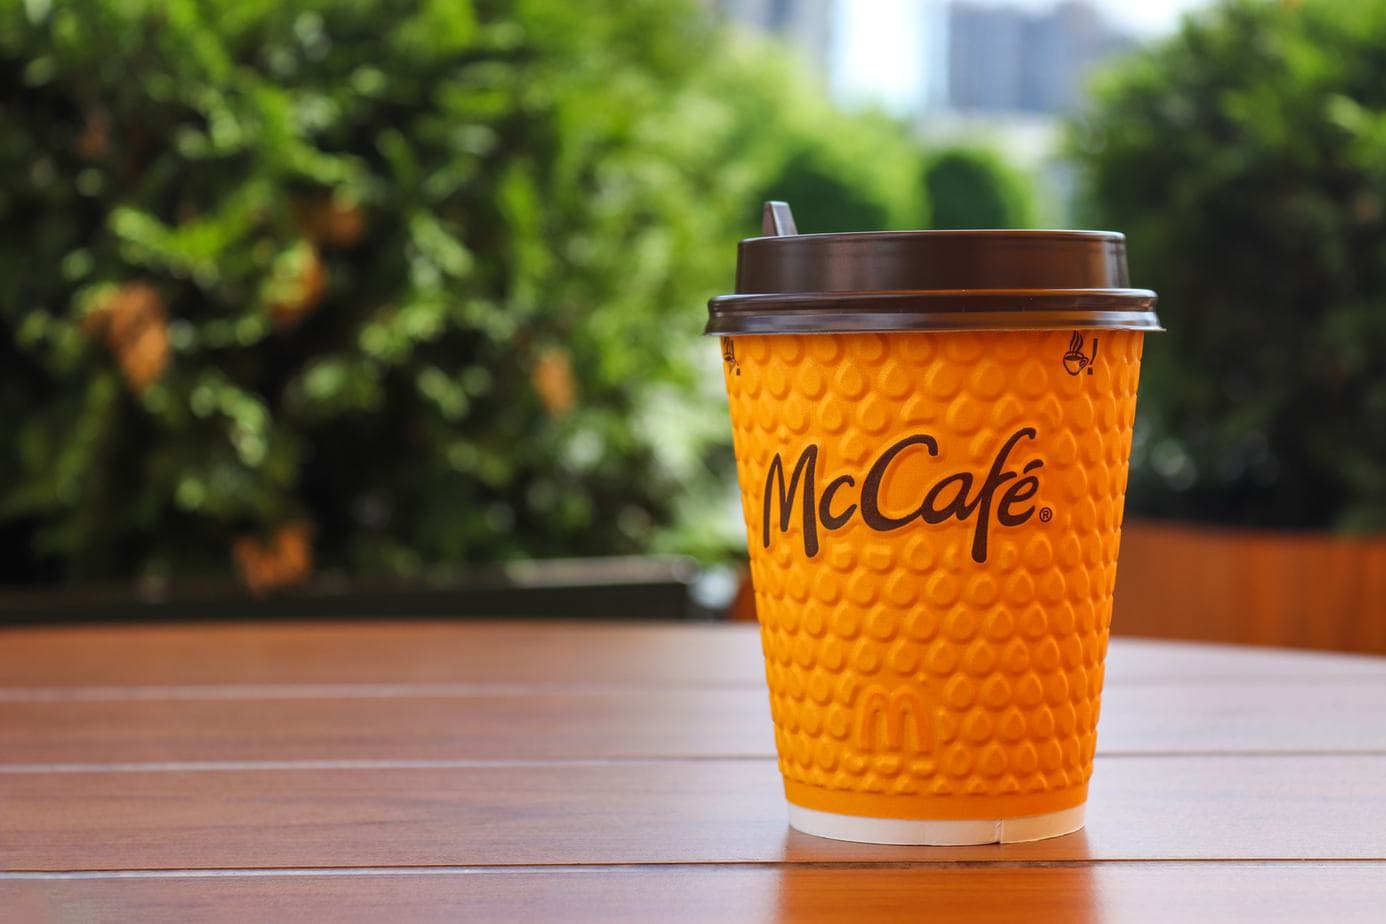 How much caffeine is in McDonald's coffee